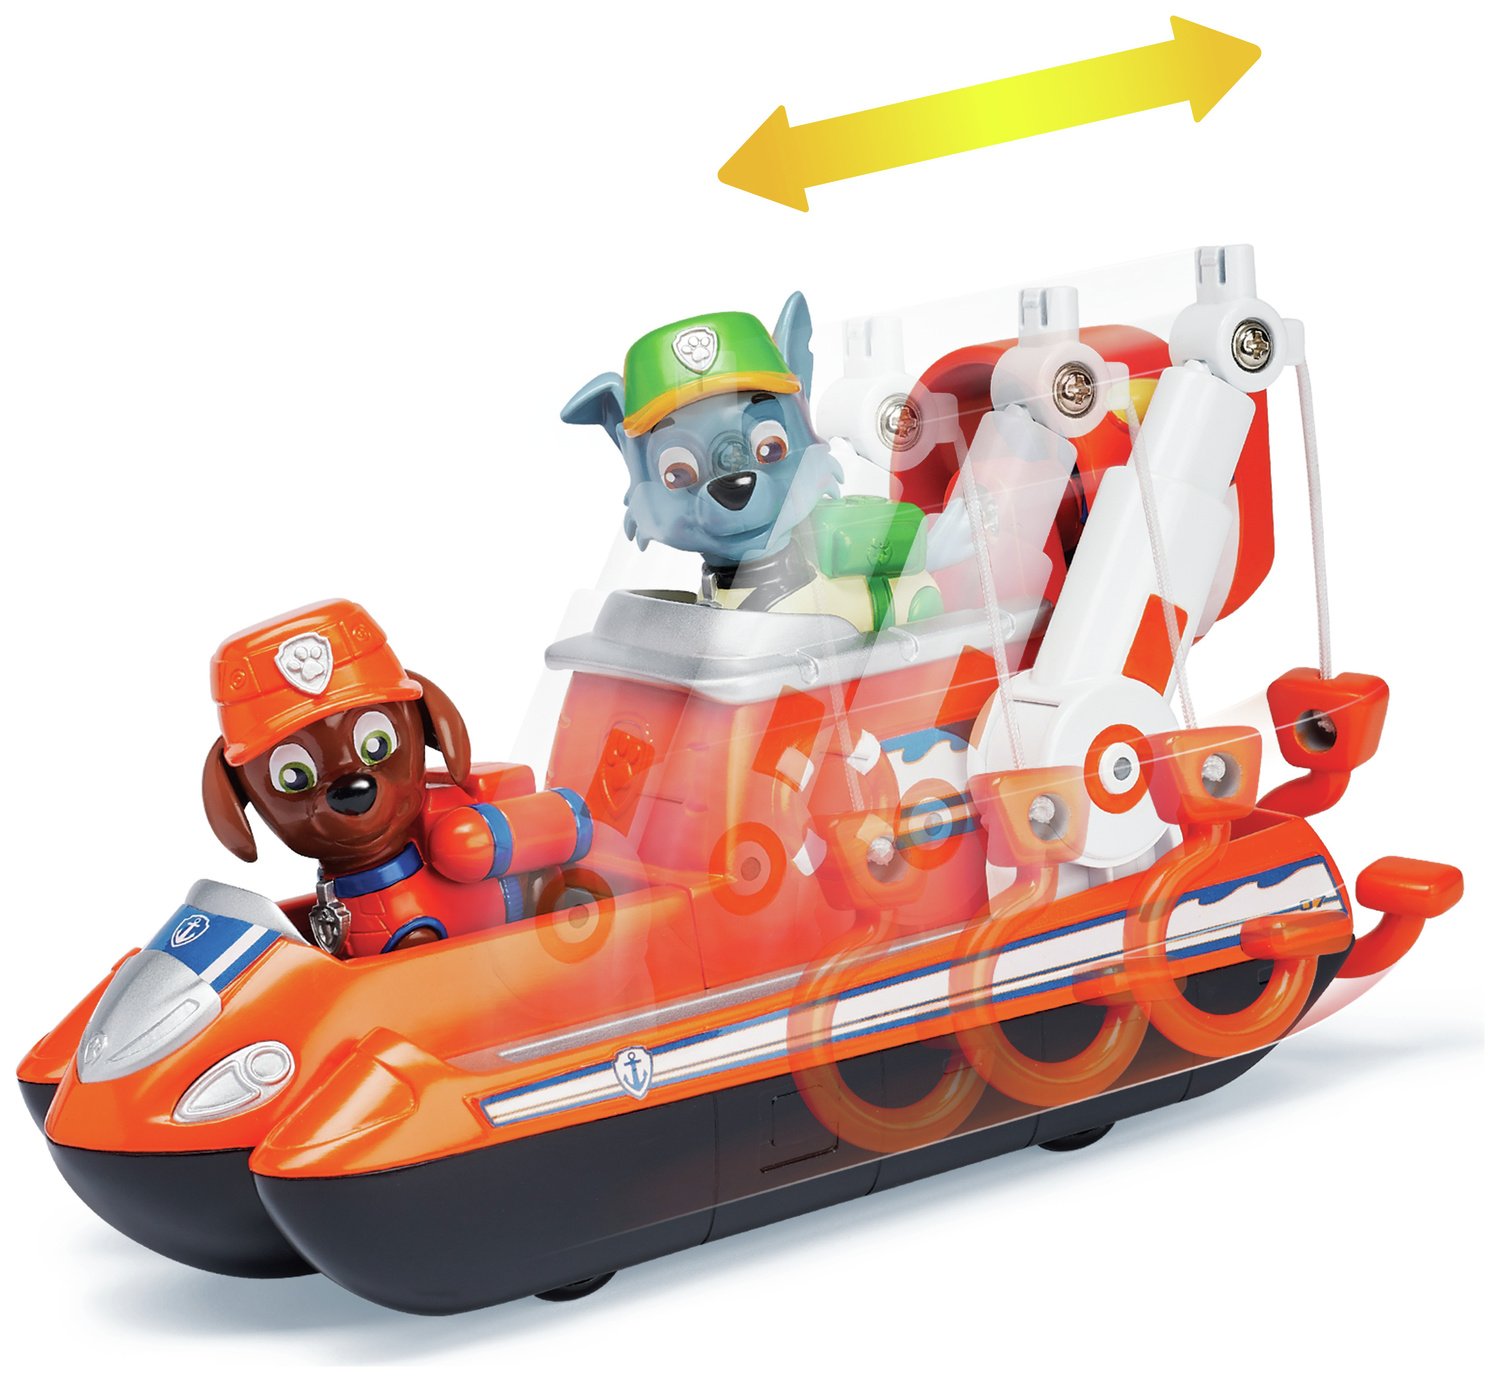 paw patrol ultimate rescue boat